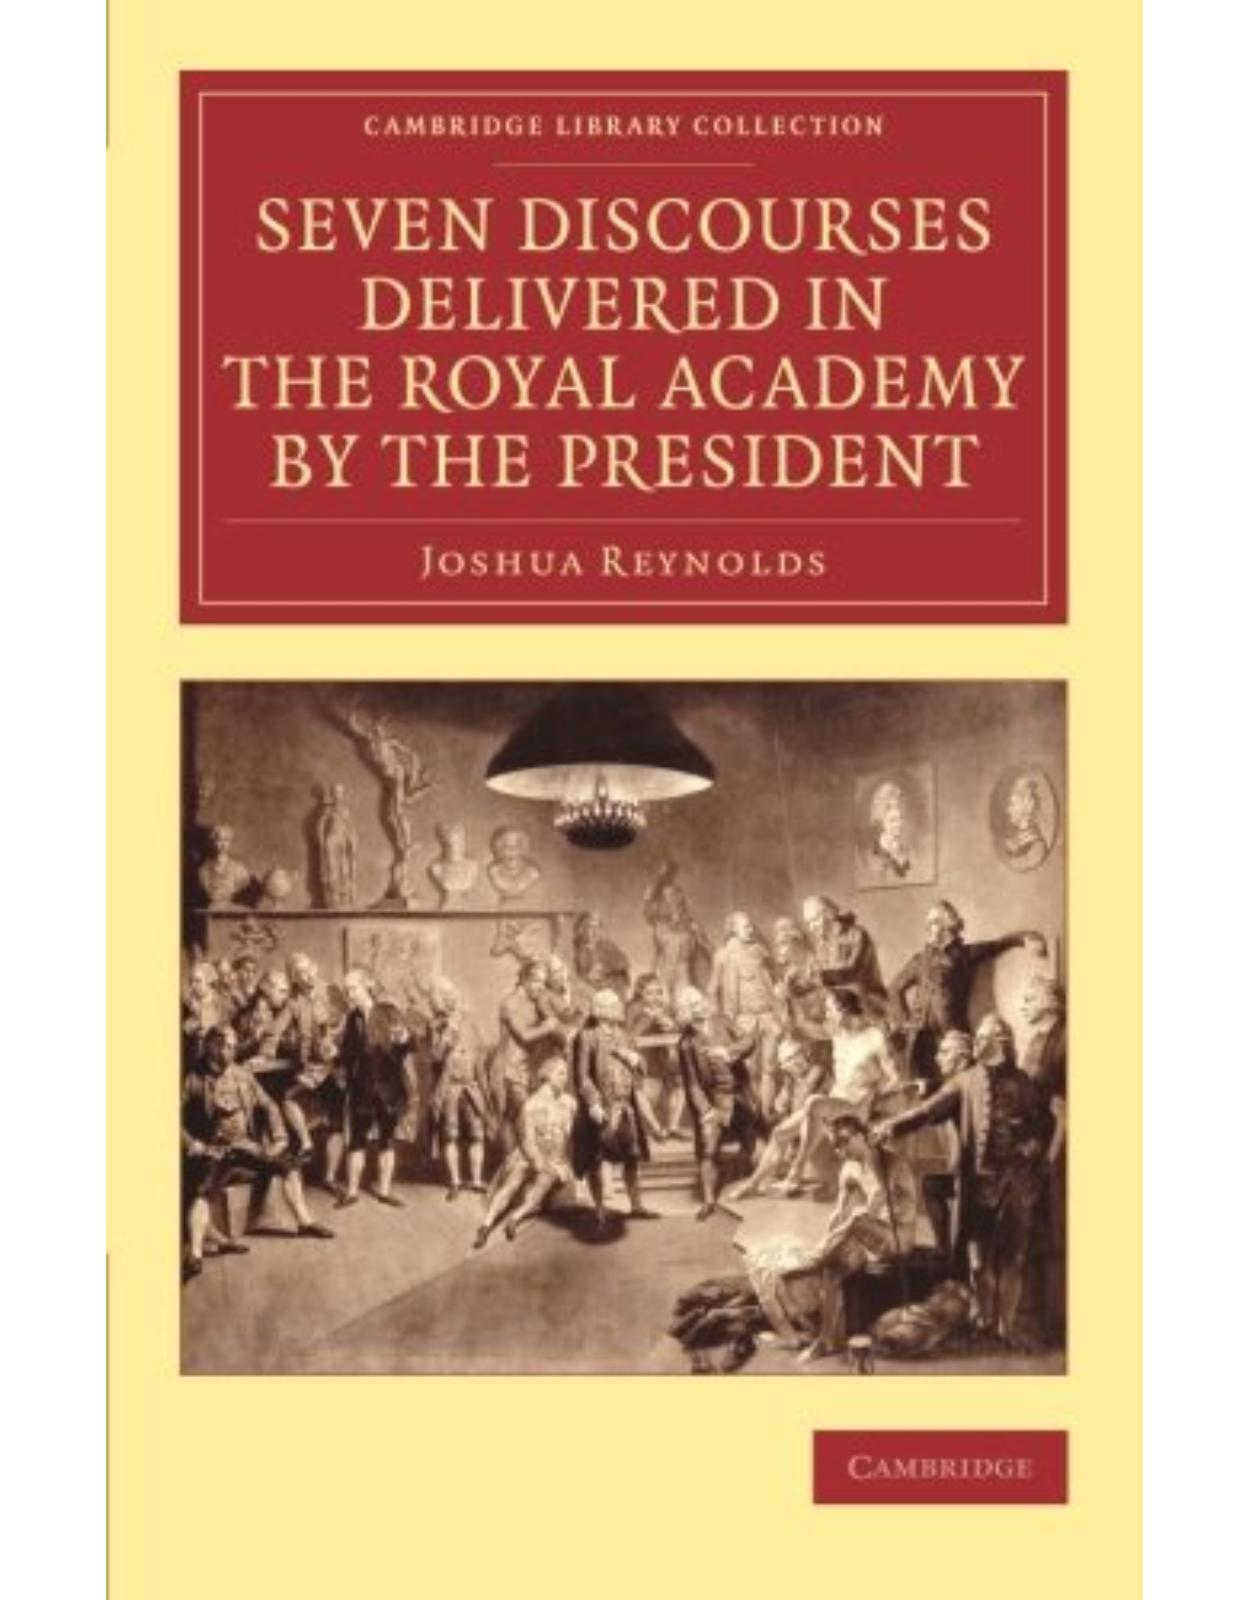 Seven Discourses Delivered in the Royal Academy by the President (Cambridge Library Collection - Art and Architecture)